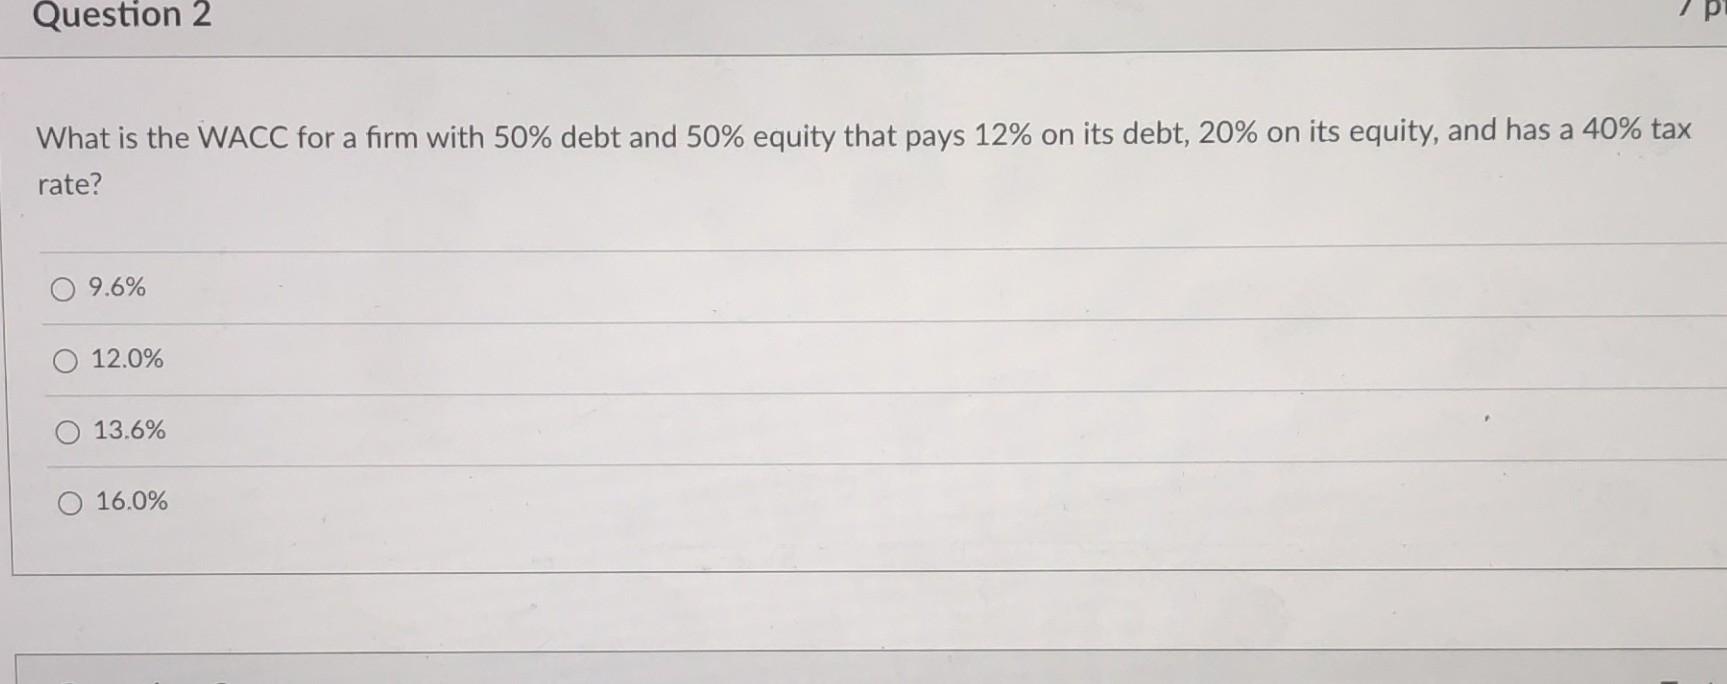 Question 2 What is the WACC for a firm with 50% debt and 50% equity that pays 12% on its debt, 20% on its